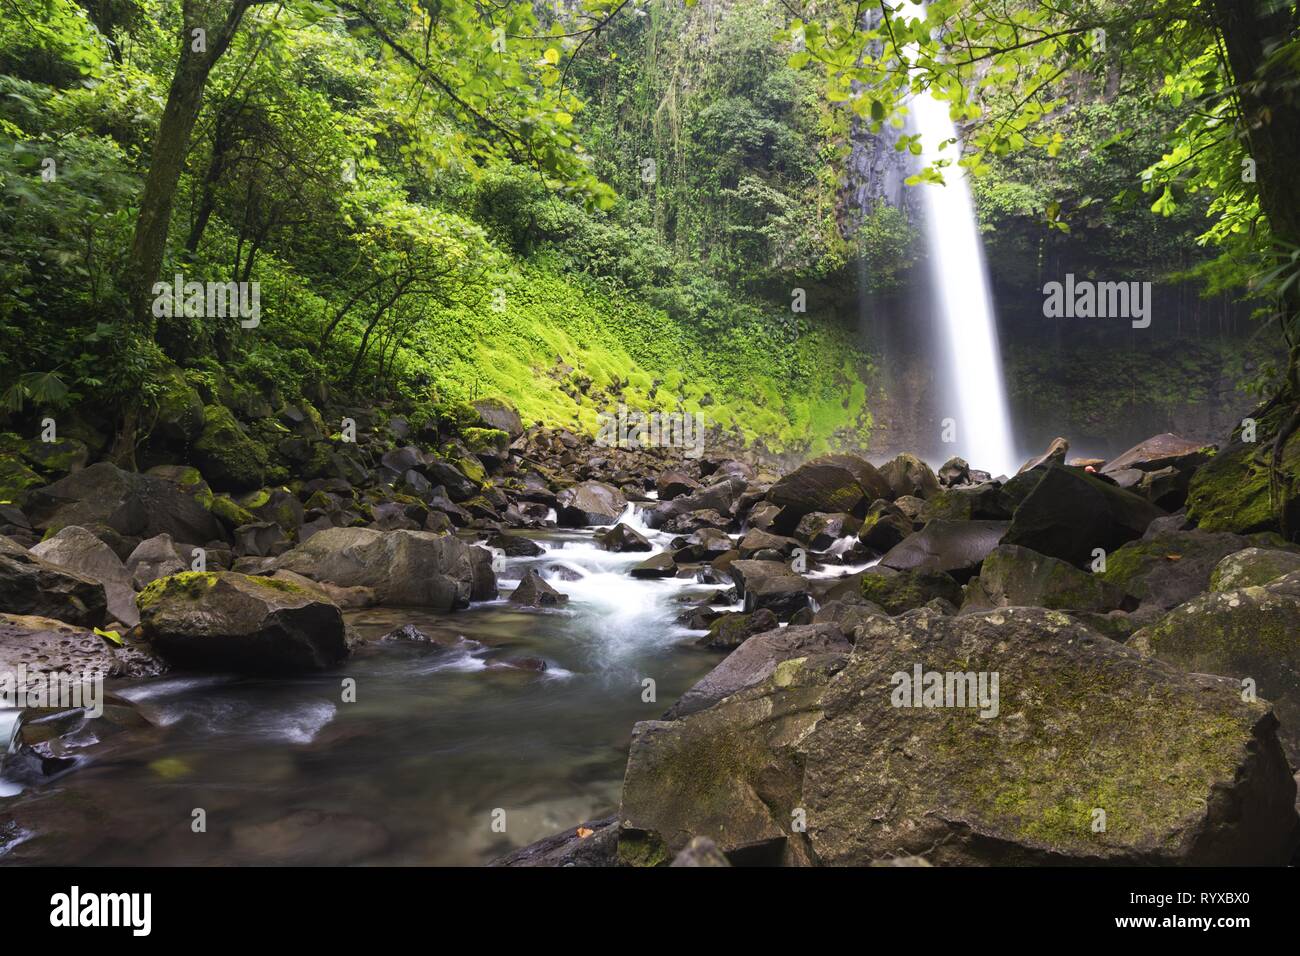 Beautiful Cascading Waterfall in Costa Rica Tropical Rainforest Jungle near La Fortuna in Arenal Volcano National Park Stock Photo